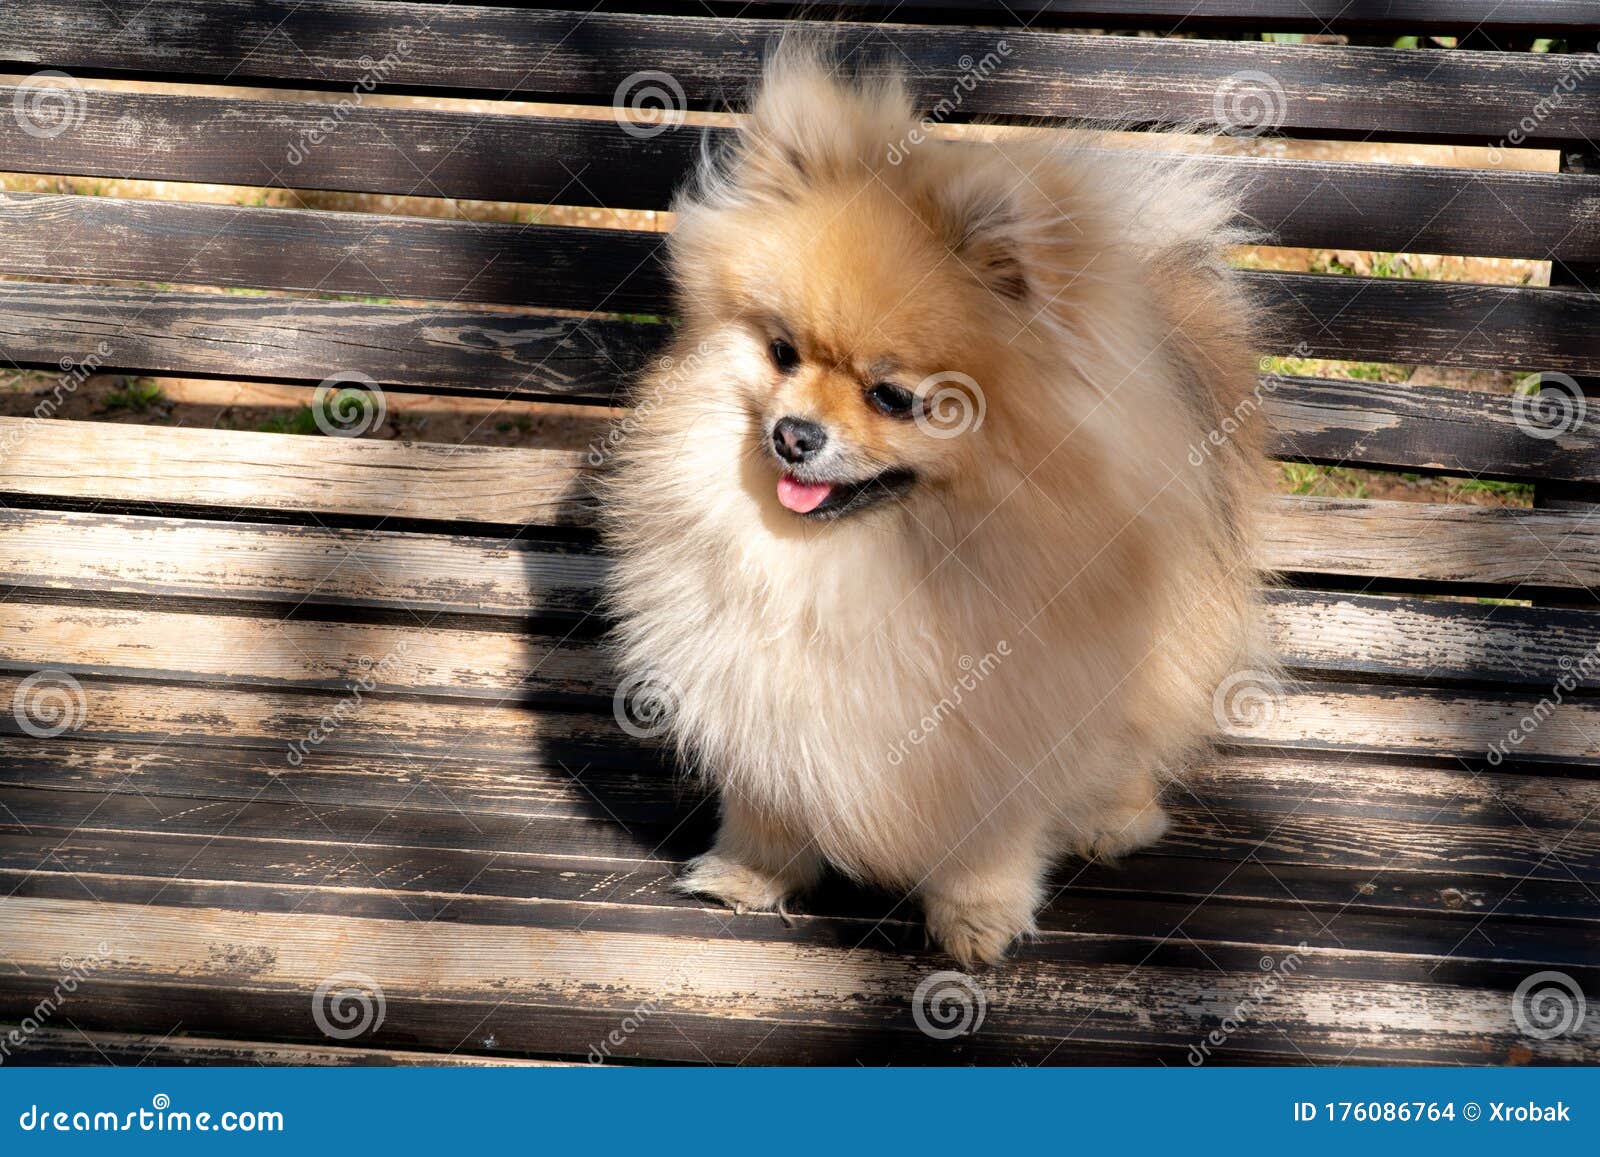 pomeranian spitz in cream sable color, photo on the bench. dog my best friend